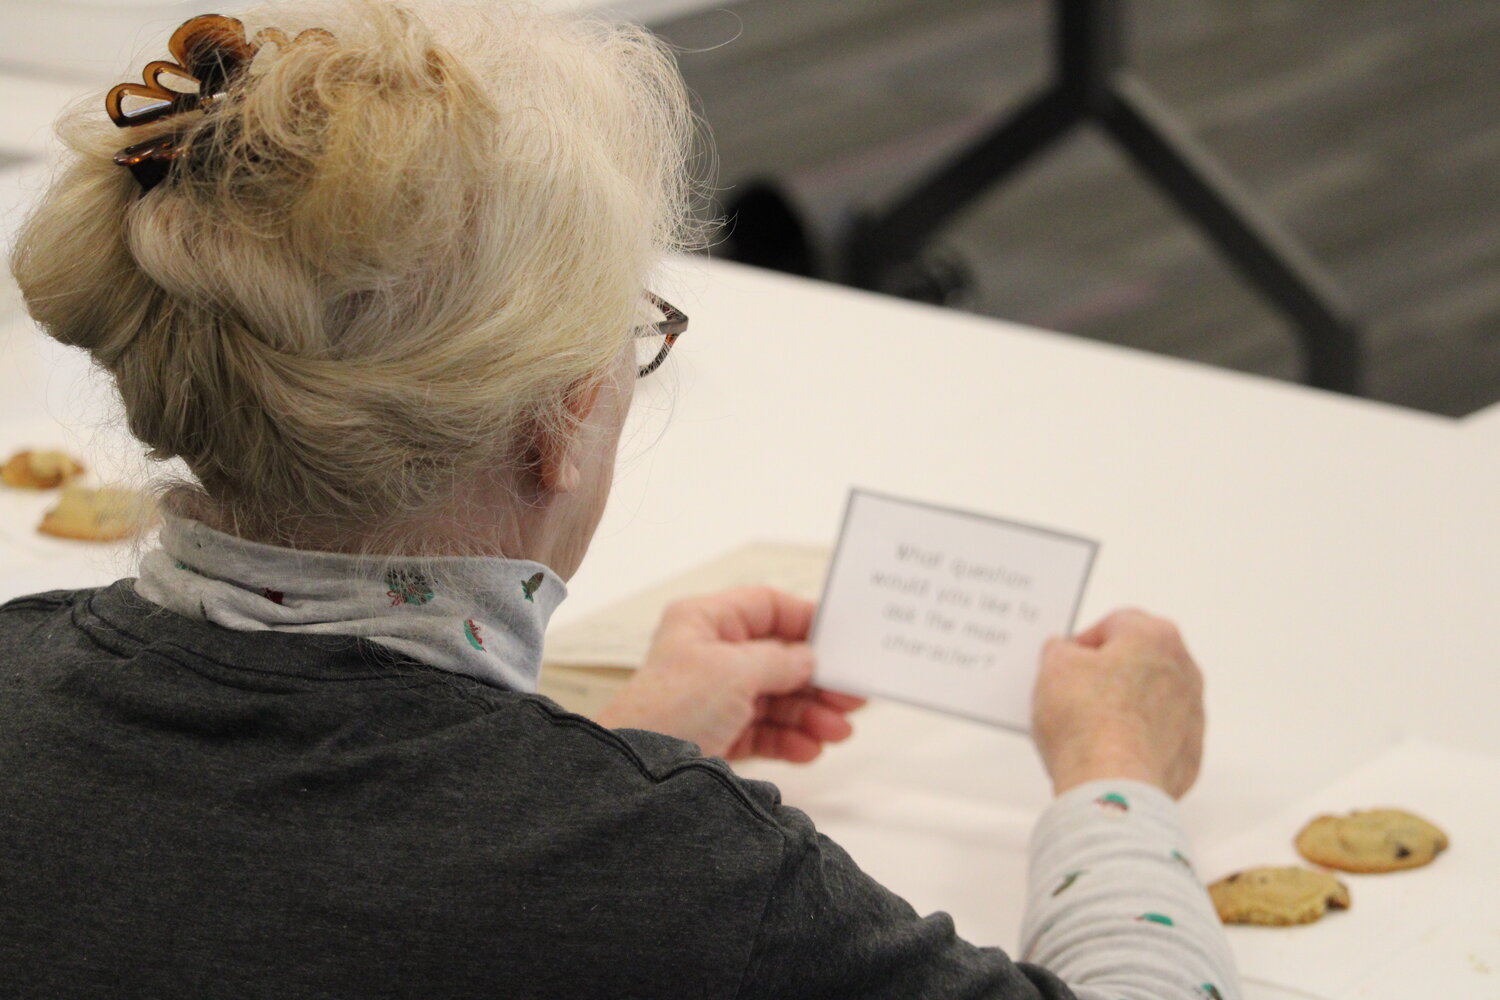 A member of the Literary Traveler’s book club reads her discussion question during the Dec. 27 meeting.